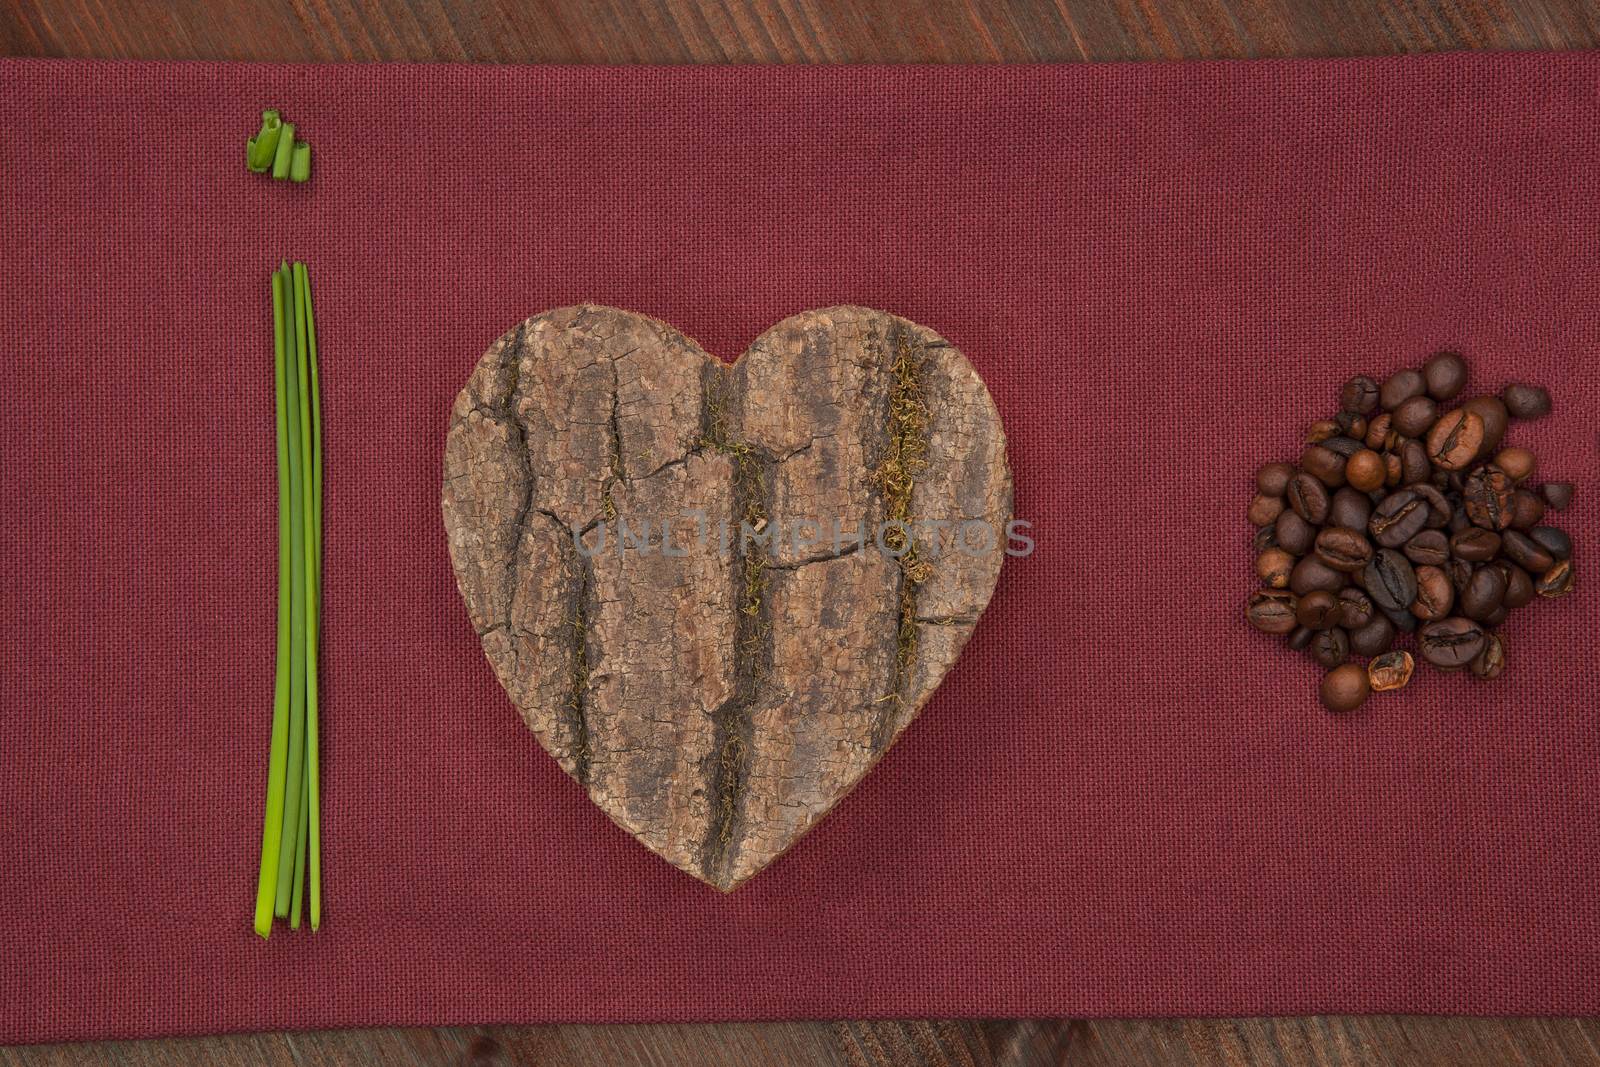 I love coffee made out of chive, wooden heart and coffee beans on burgundy cloth.